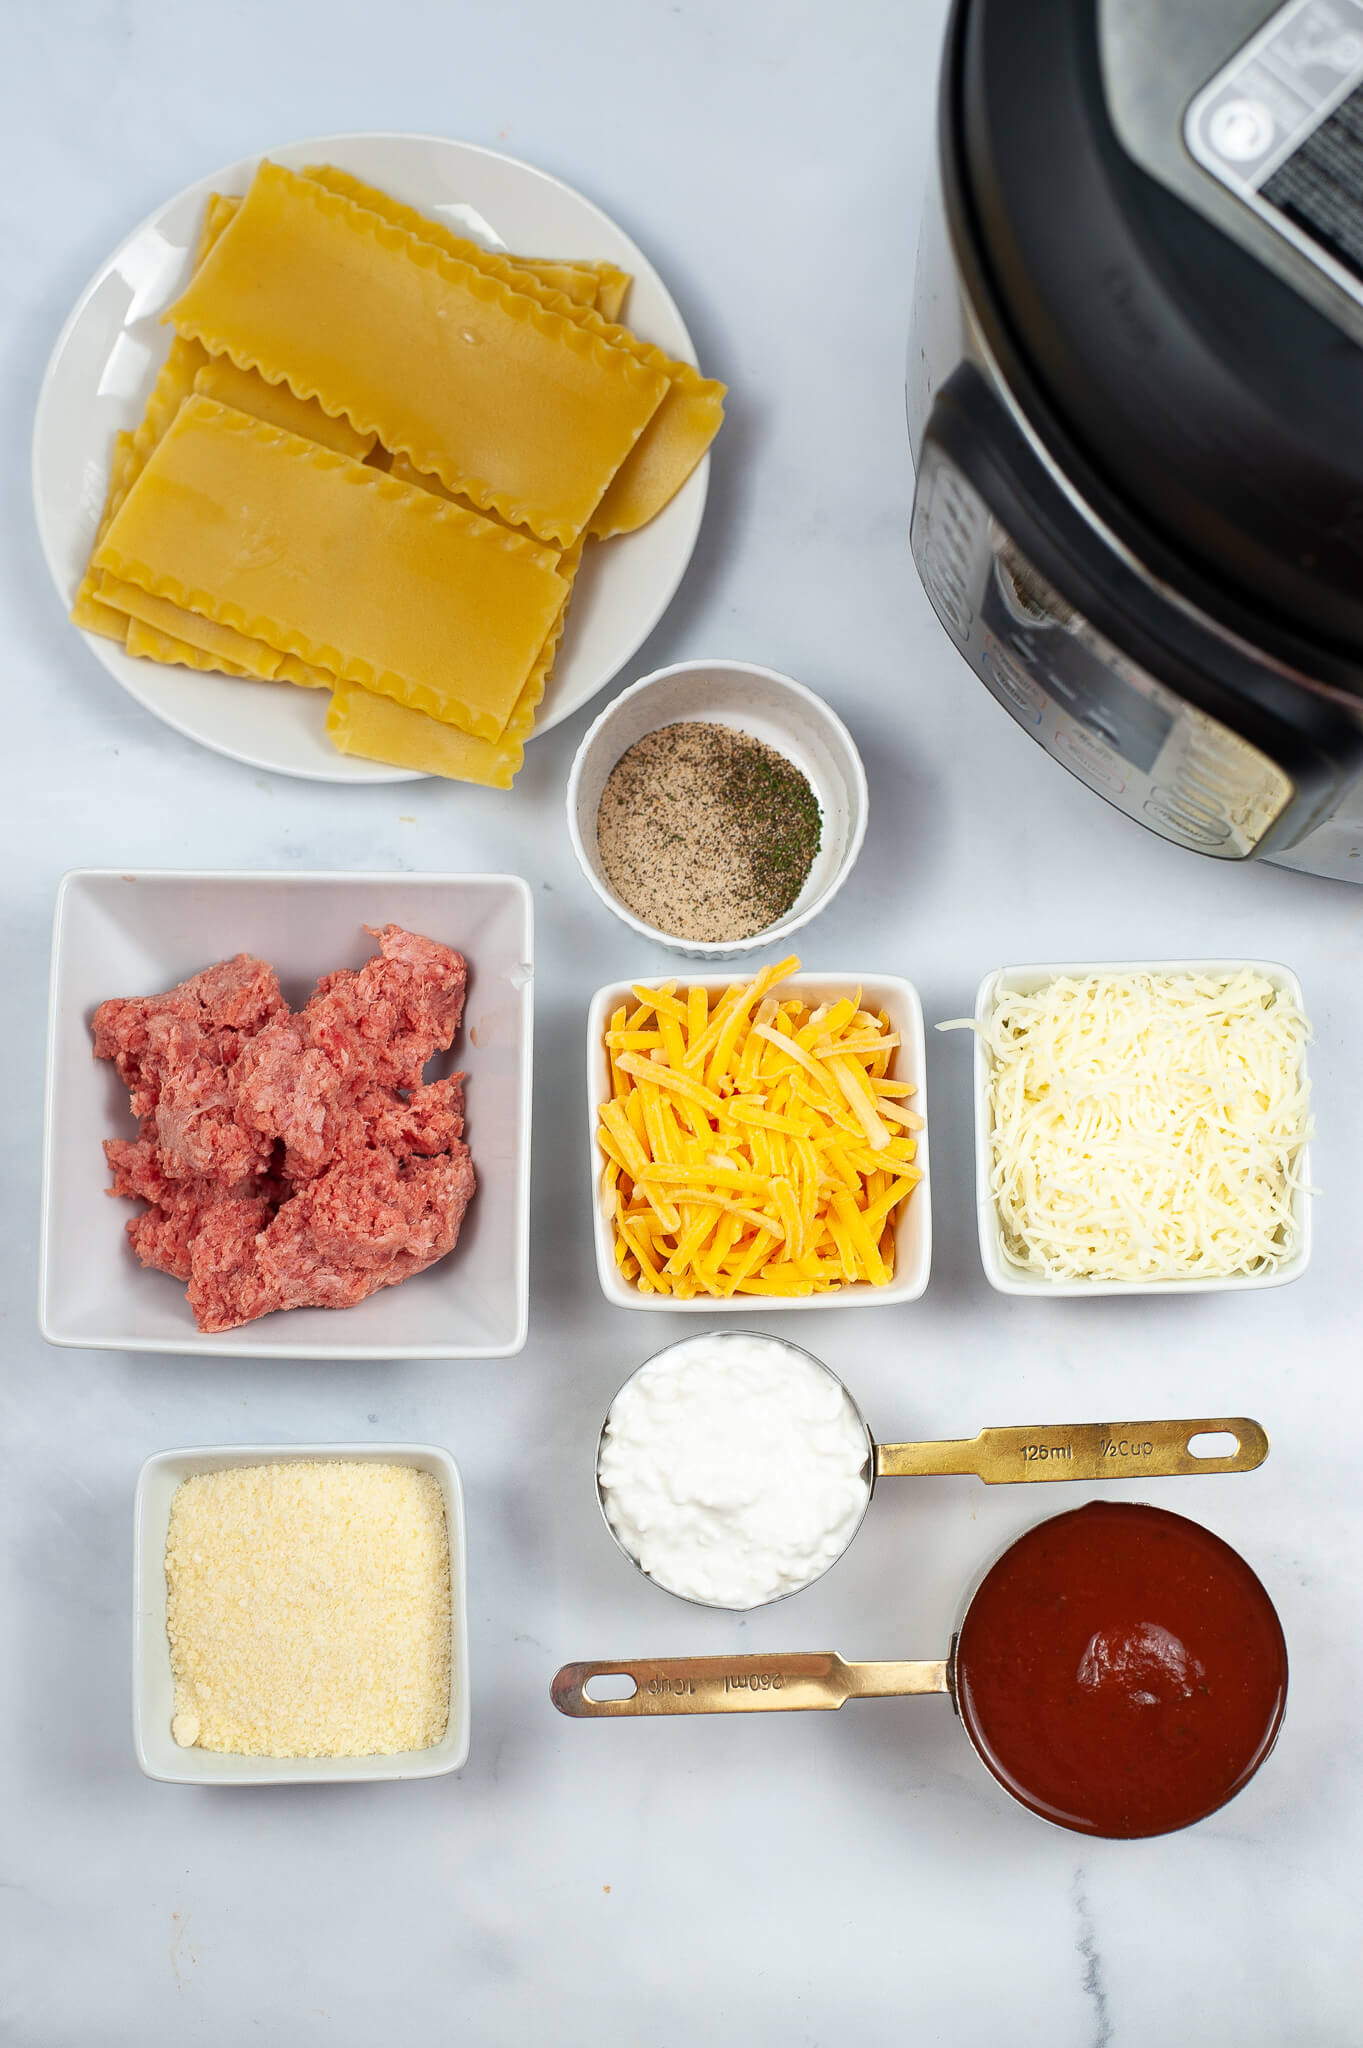 Ingredients for the meal are displayed on a white table. Ground beef, cheese, noodles and sauce.